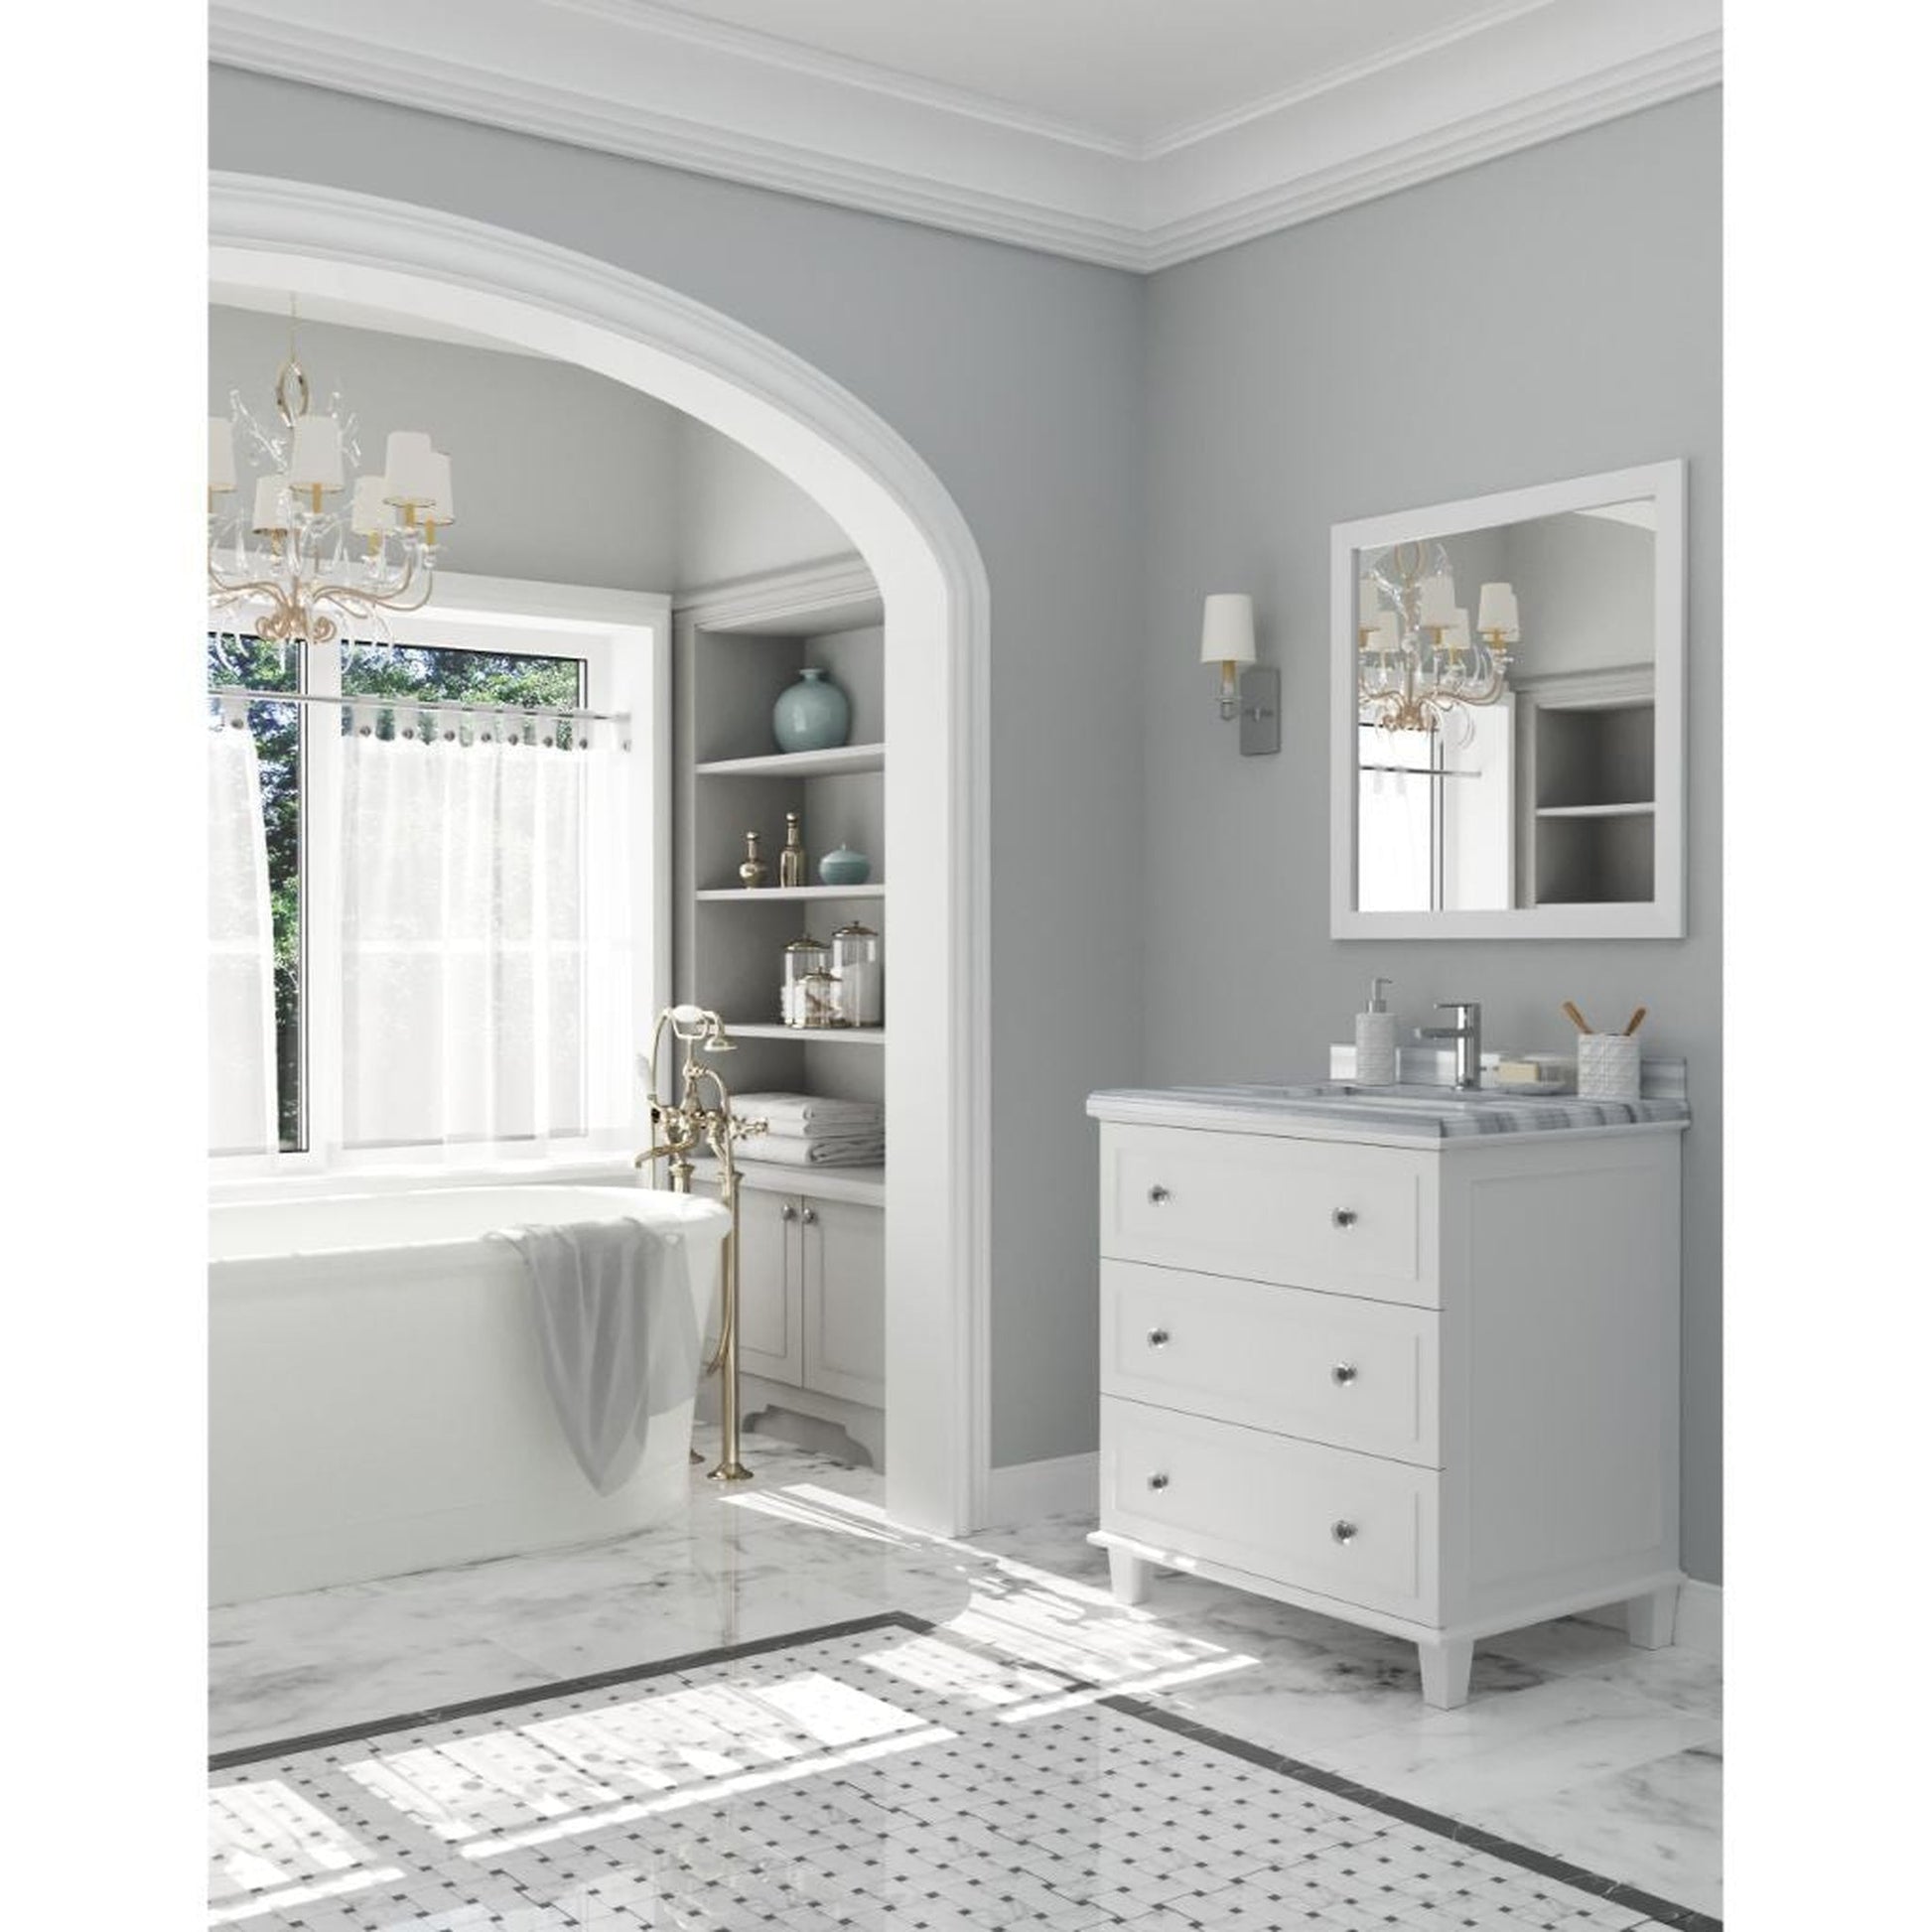 Laviva Luna 30" White Vanity Base and White Stripes Marble Countertop with Rectangular Ceramic Sink